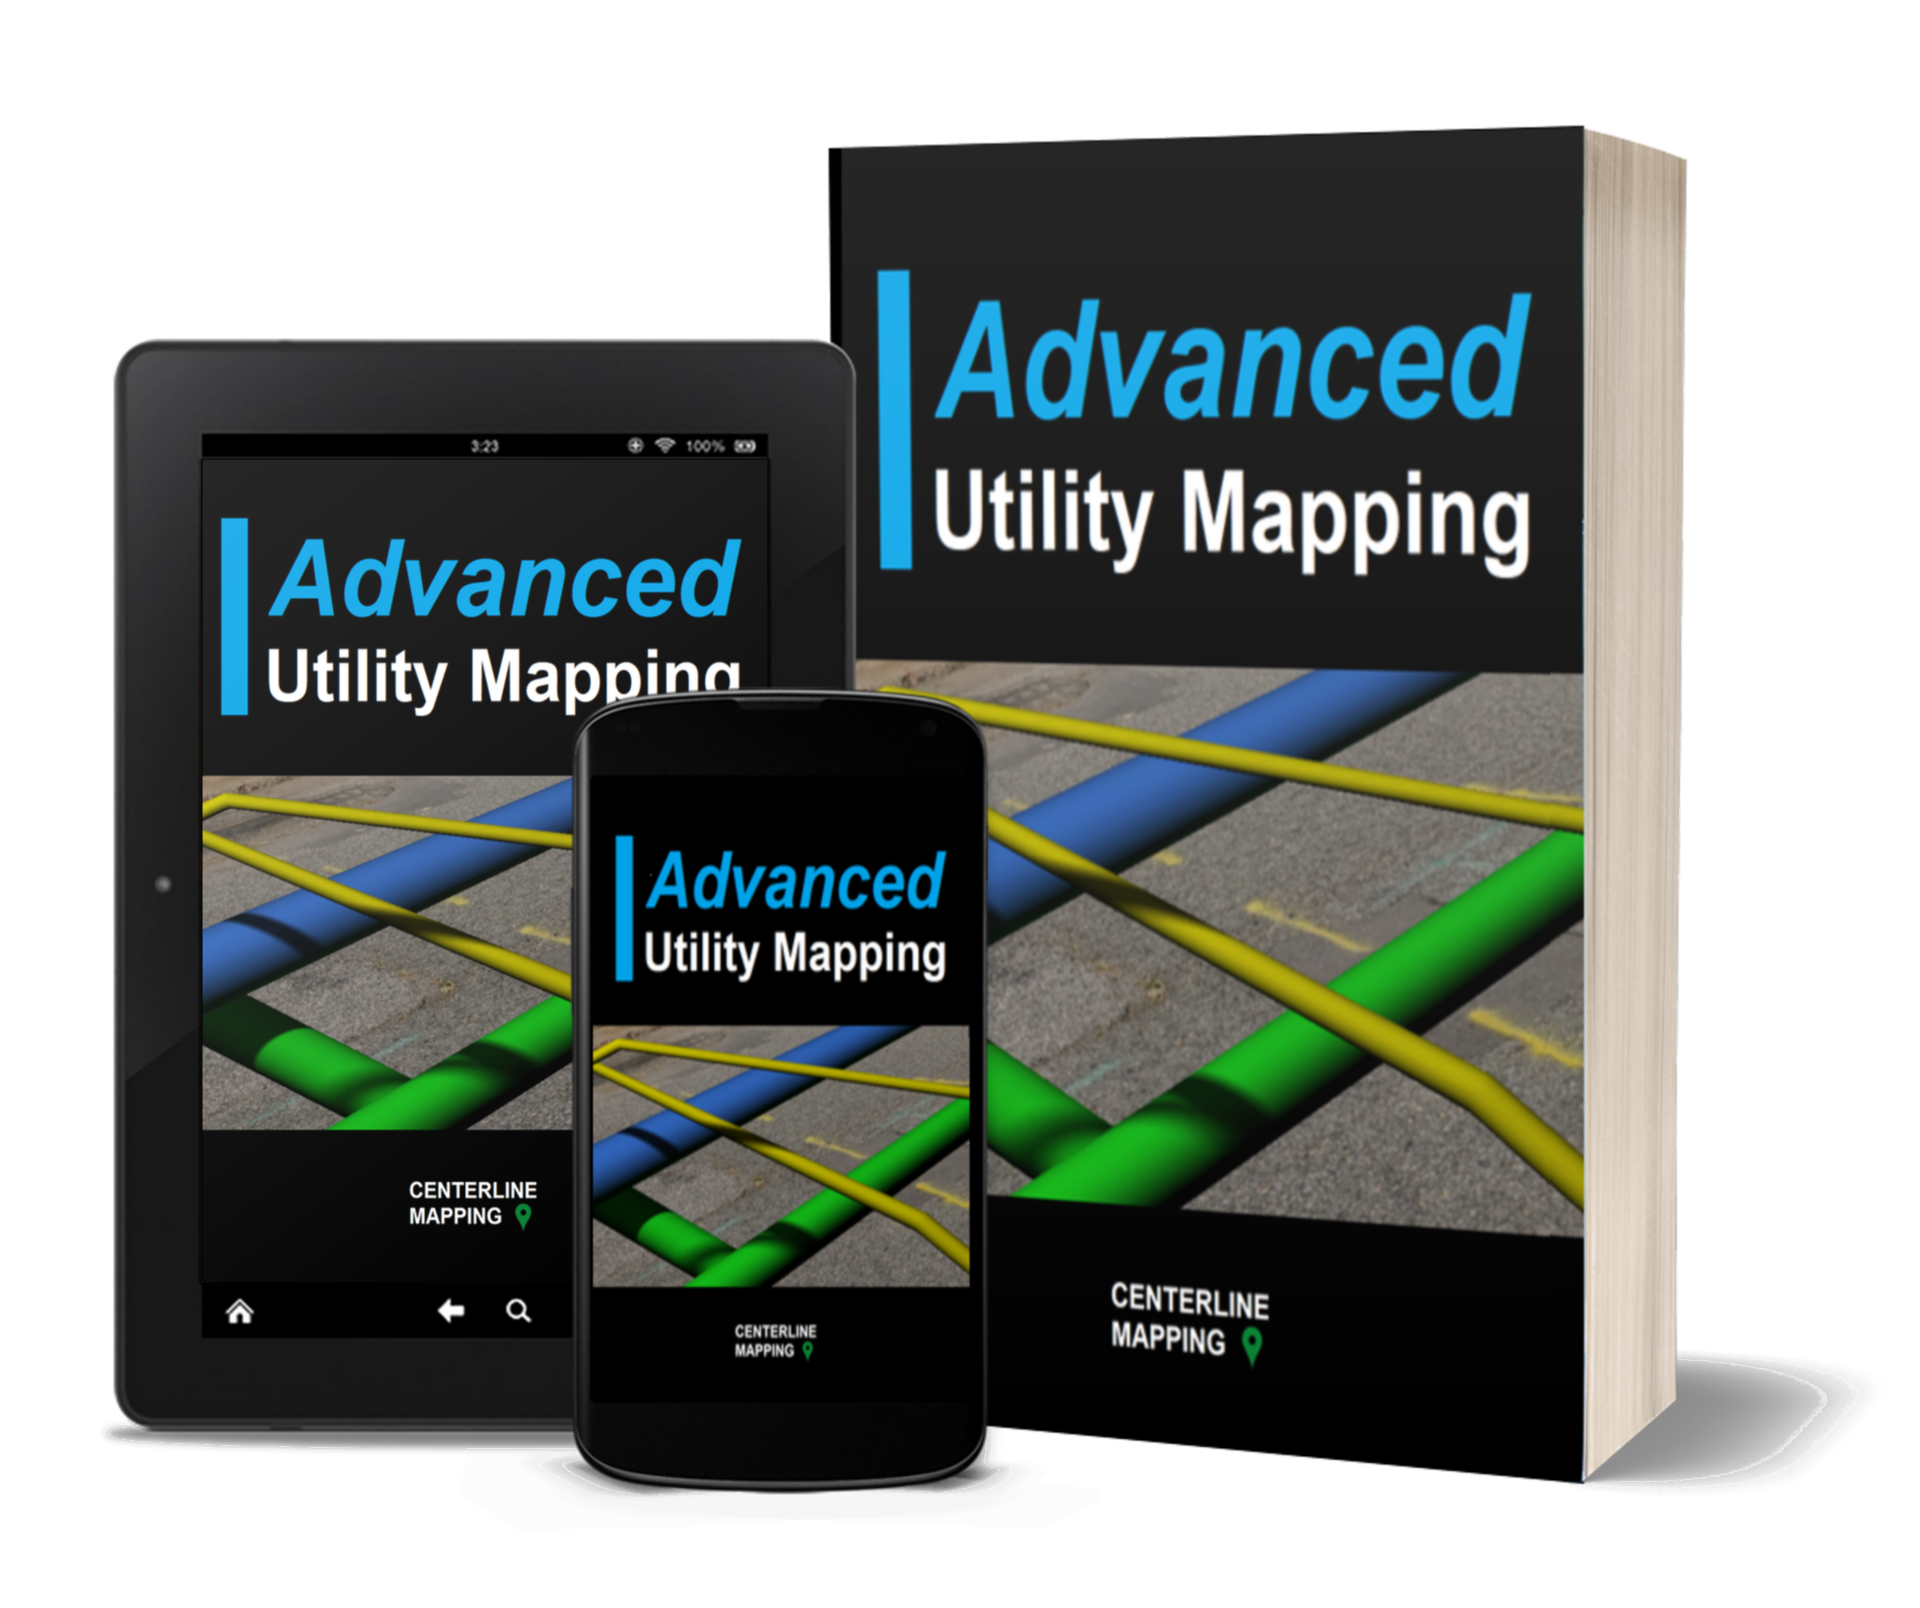 Advanced Utility Mapping